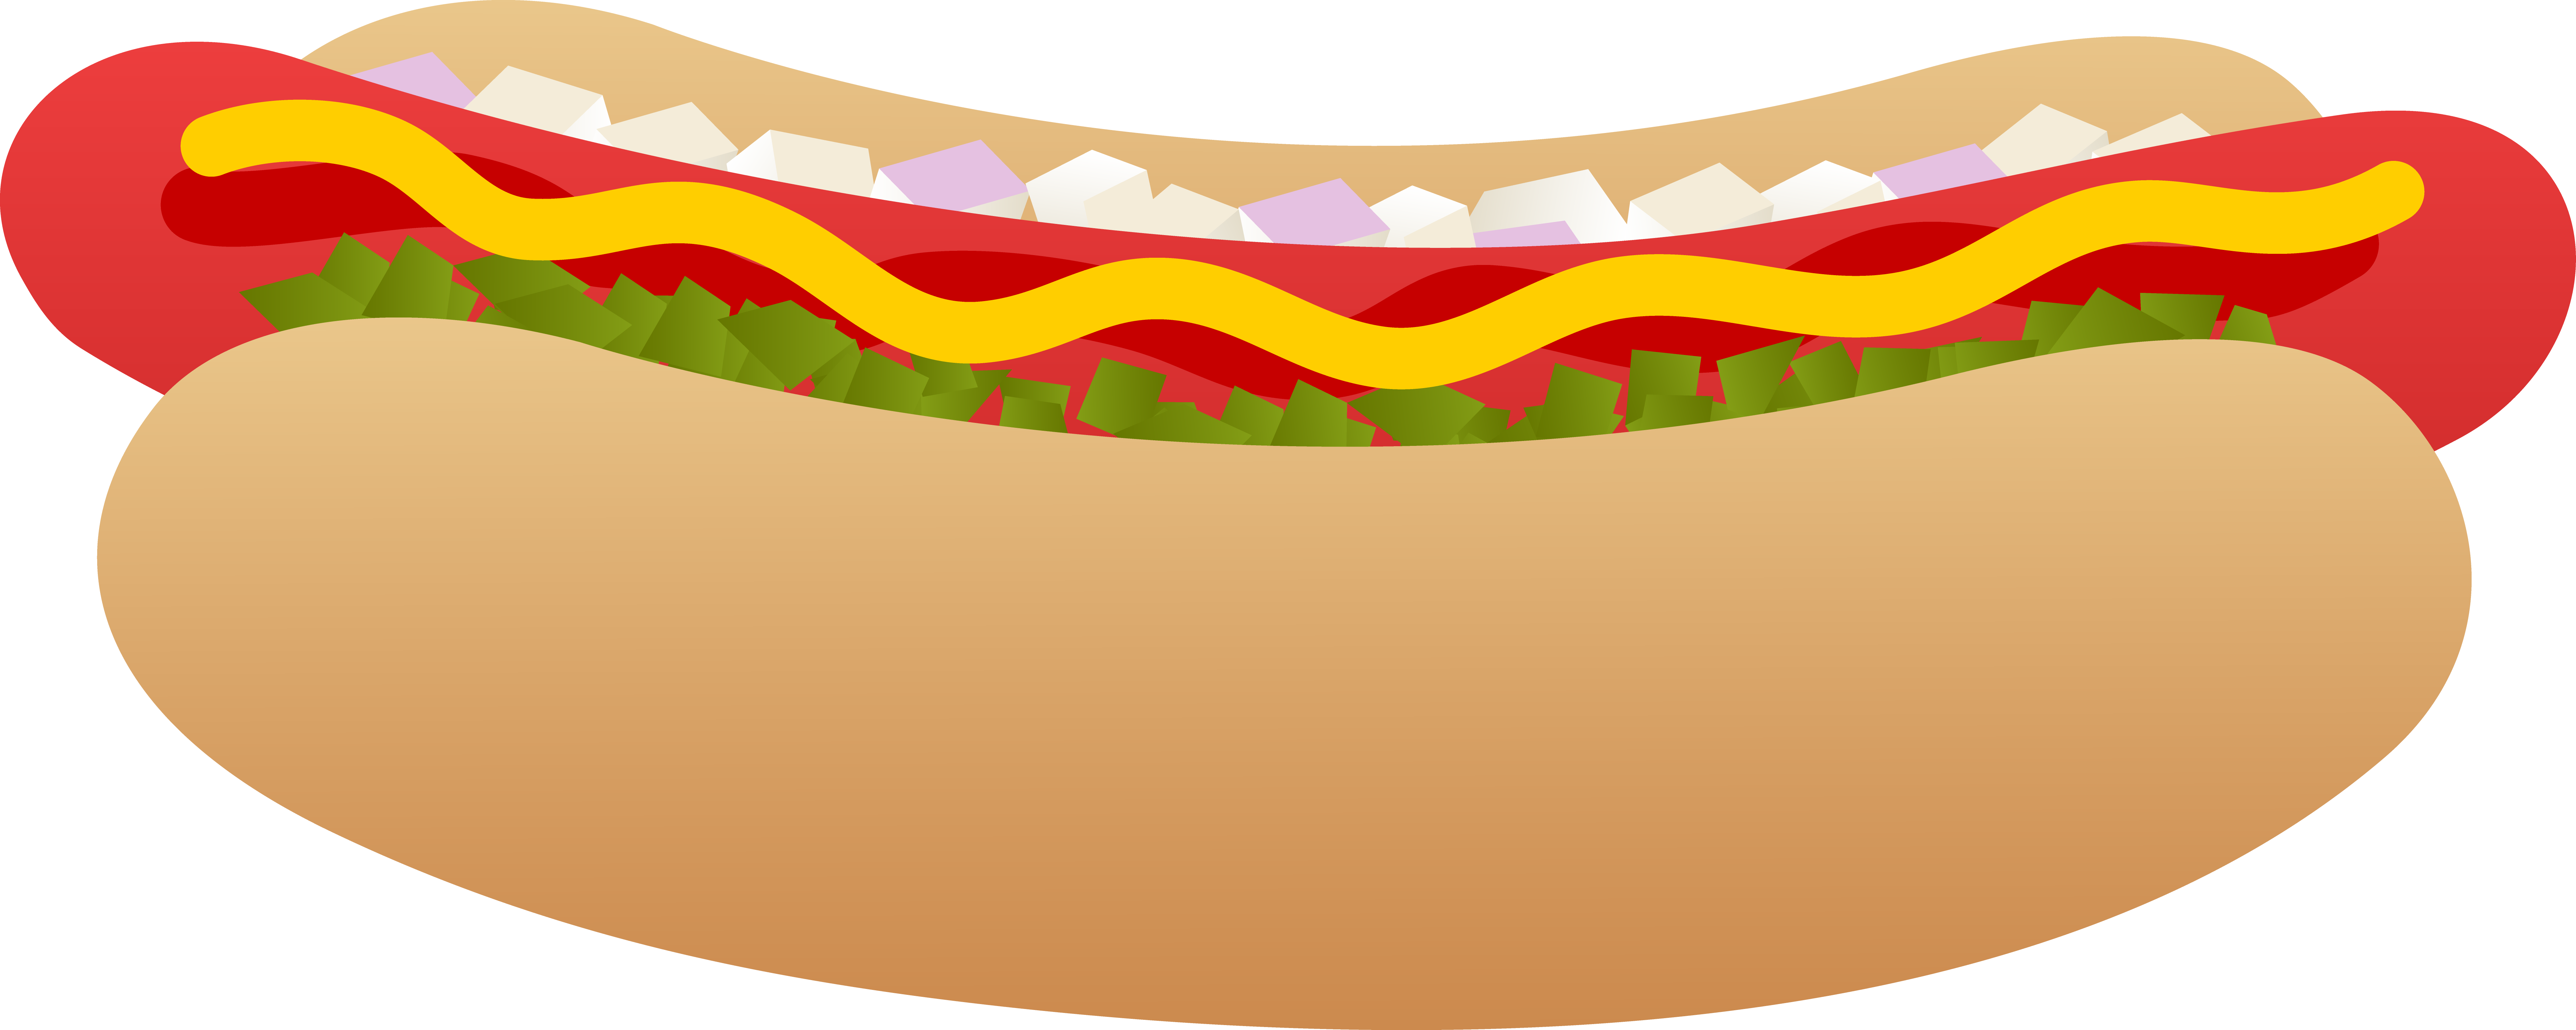 Hot dog sausage clipart - Clipground